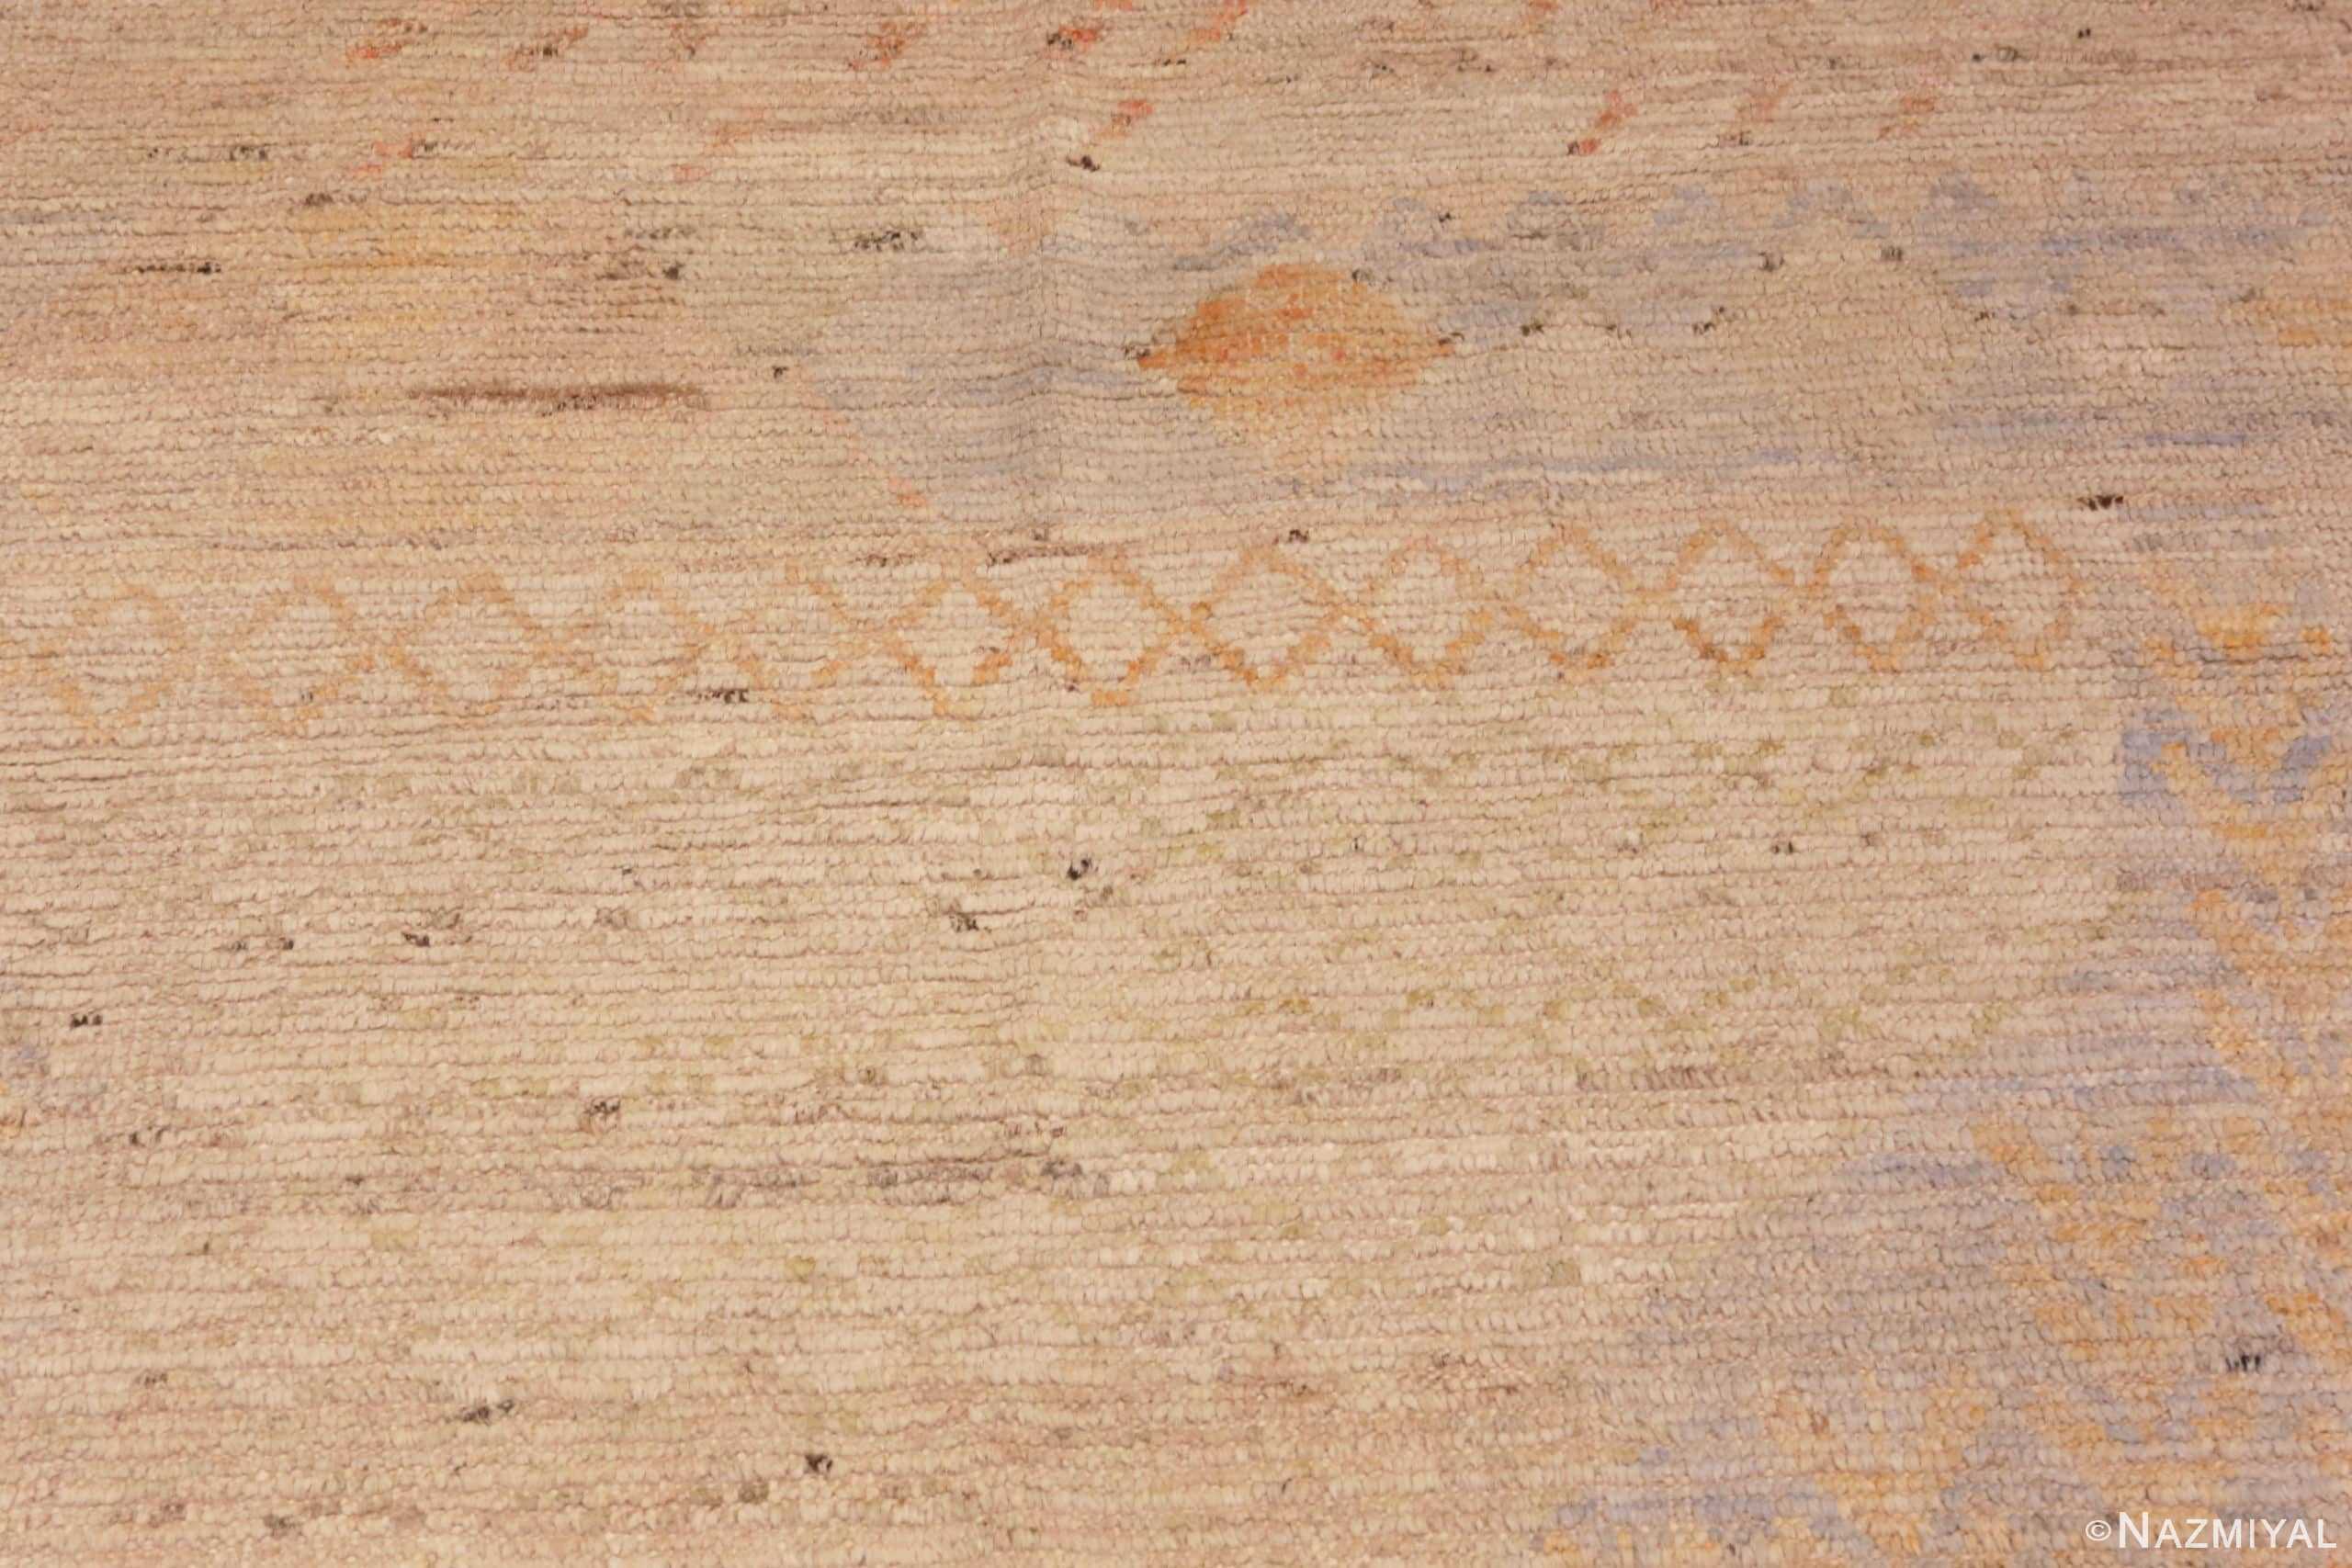 Details Of Oversized Decorative Contemporary Distressed Area Rug 60944 by Nazmiyal Antique Rugs